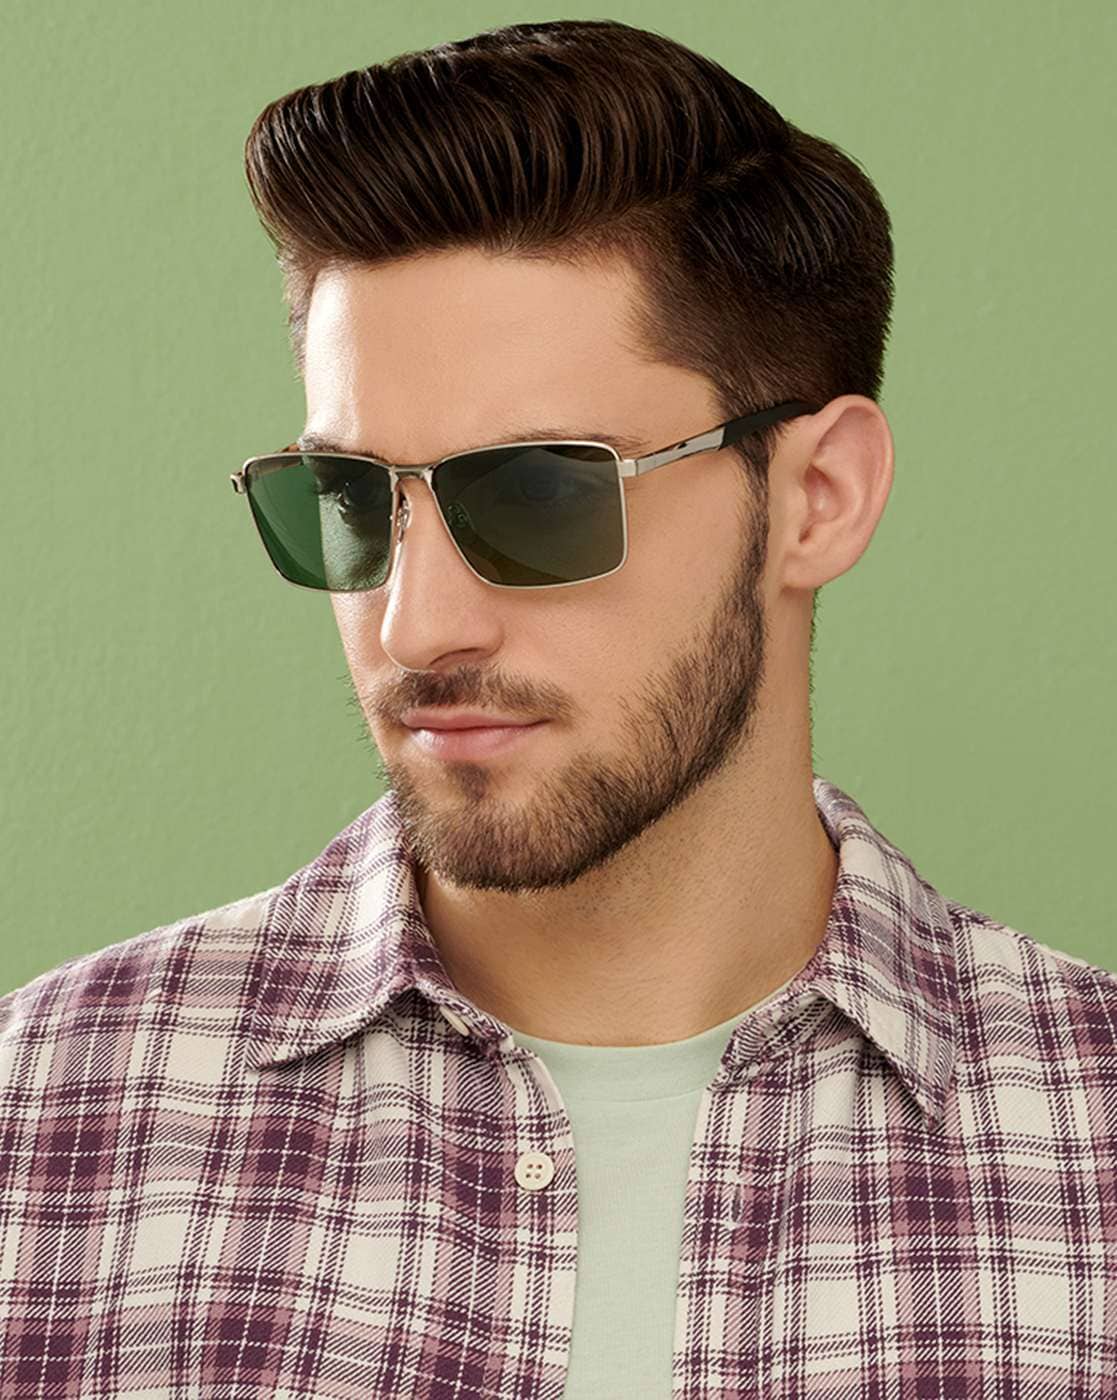 Buy Silver Sunglasses for Men by Vincent Chase Online